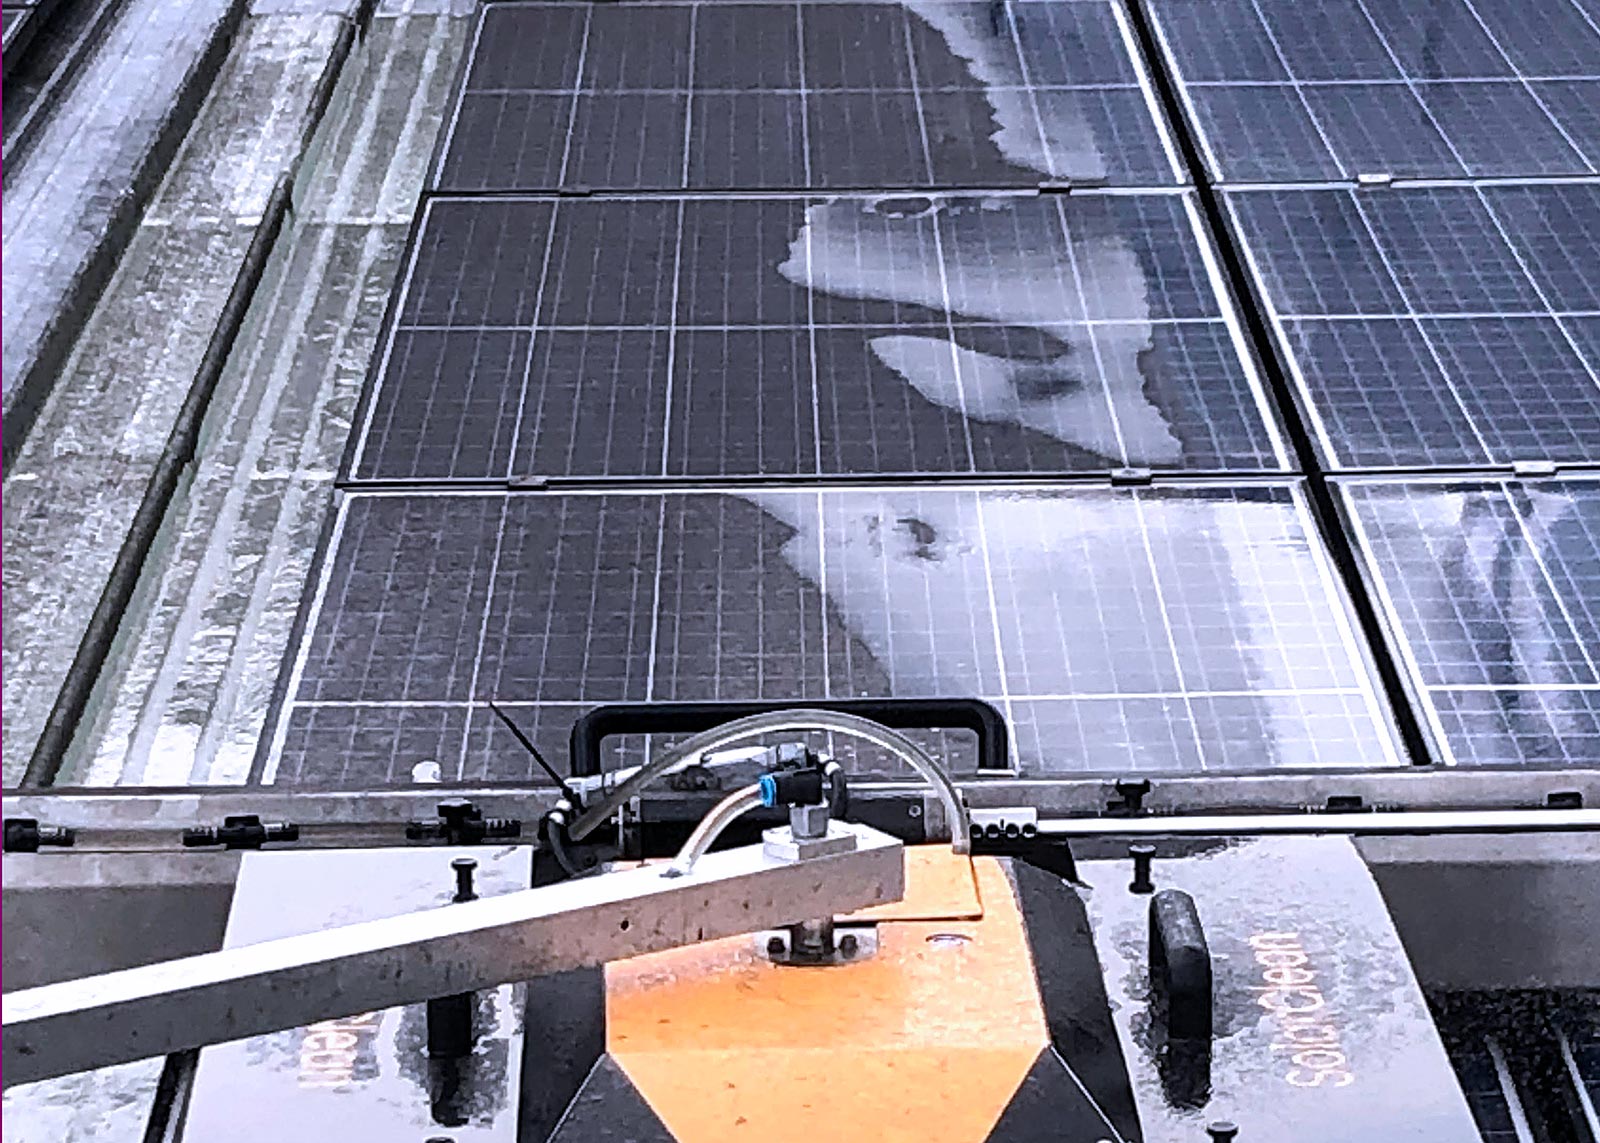 solar panels shining after being cleaned safely and without scratches by a mechanized robot